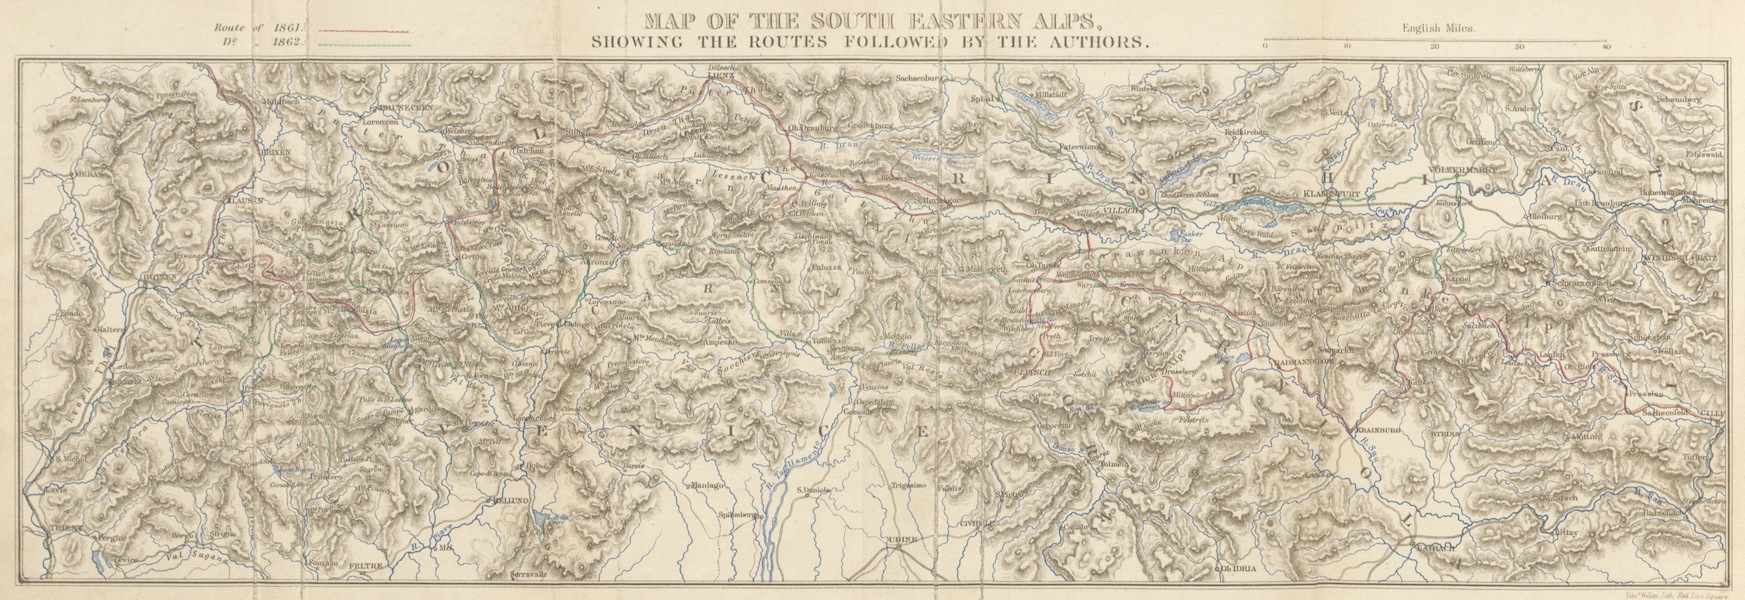 The Dolomite Mountains - Map of the South Eastern Alps Showing the Routes Followed by the Authors (1864)